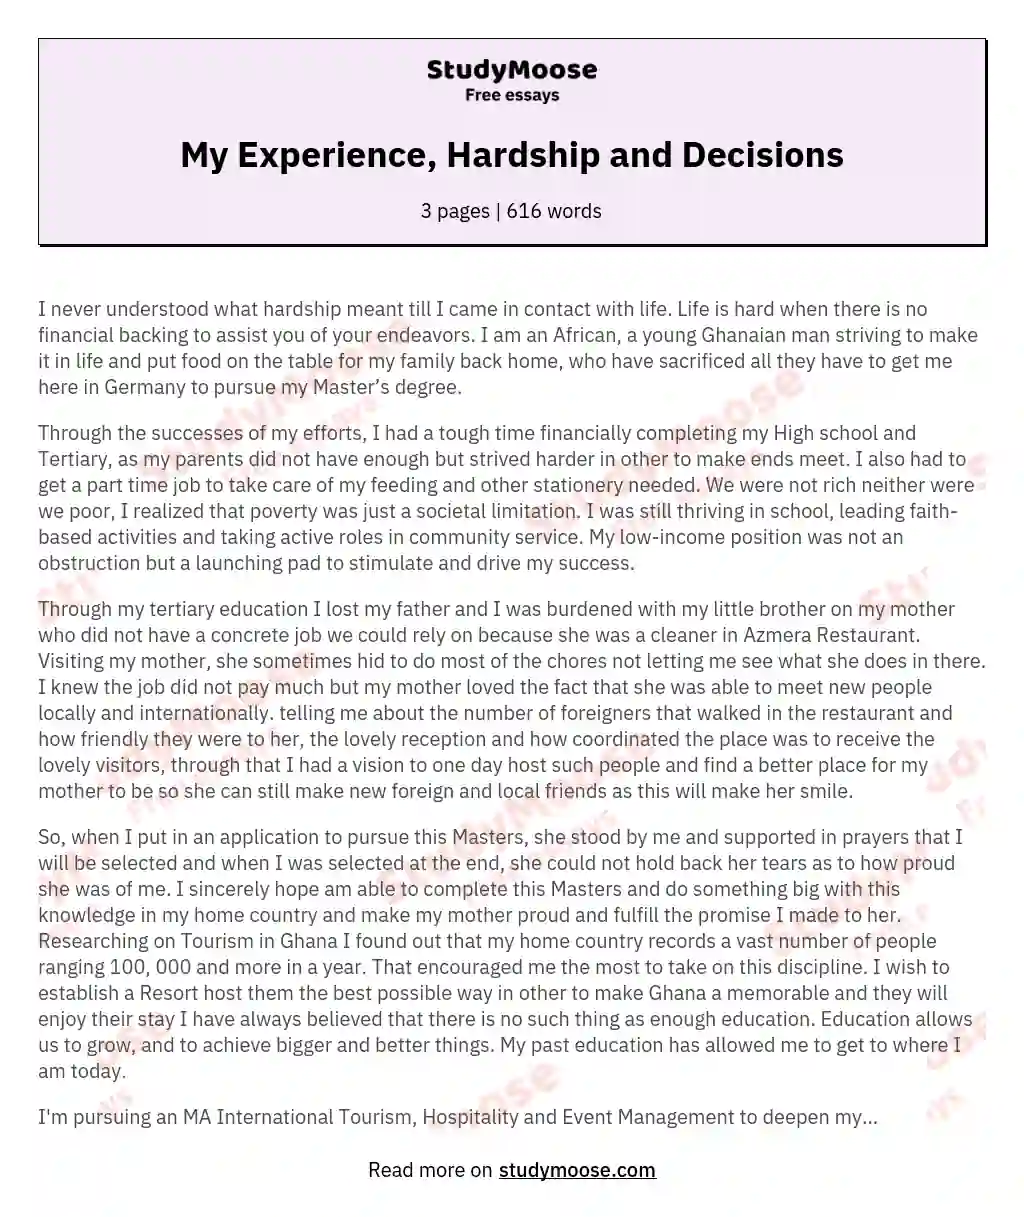 My Experience, Hardship and Decisions essay